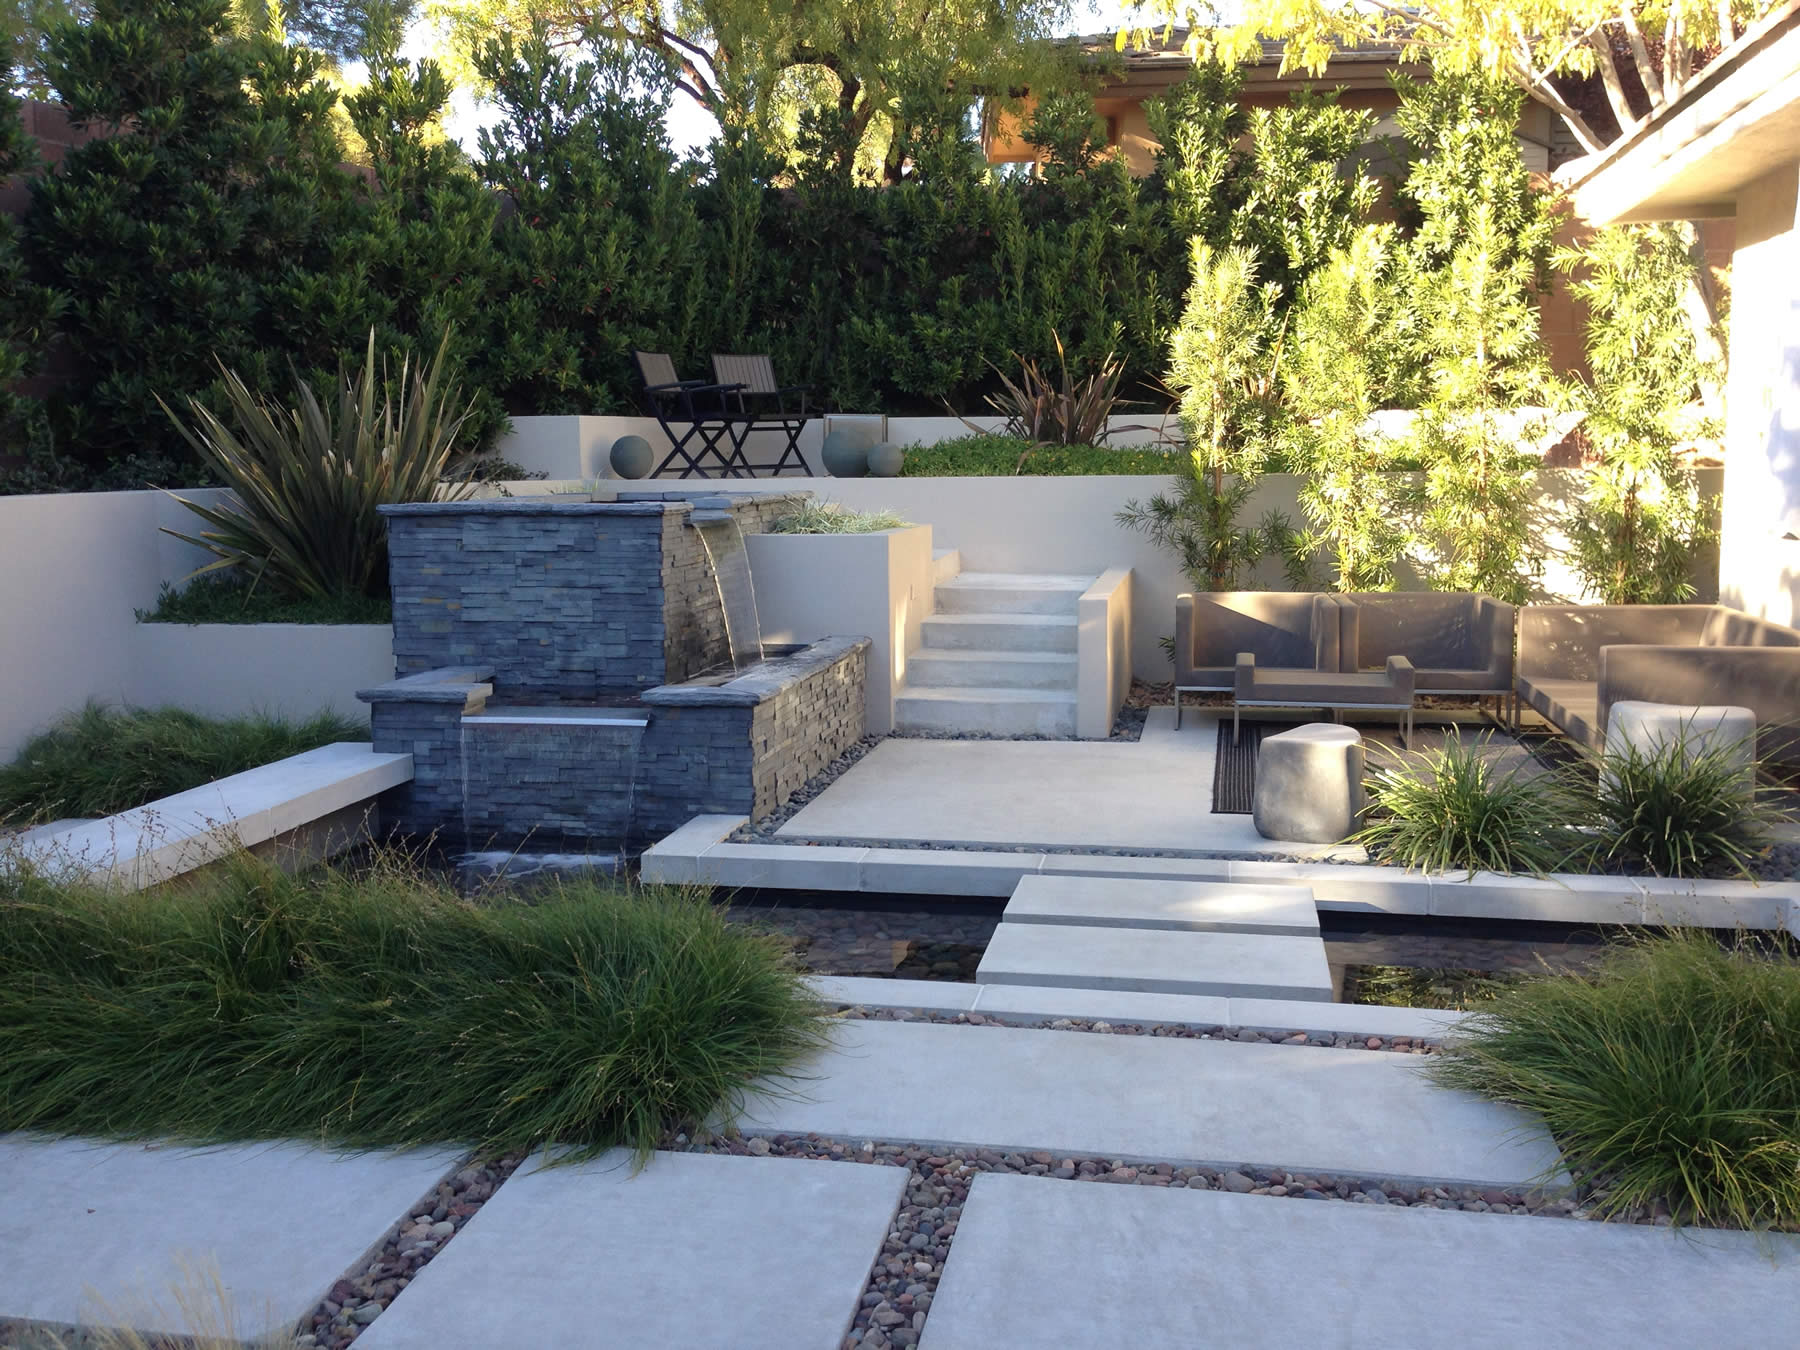 Commercial Landscape Architect serving Nevada and California